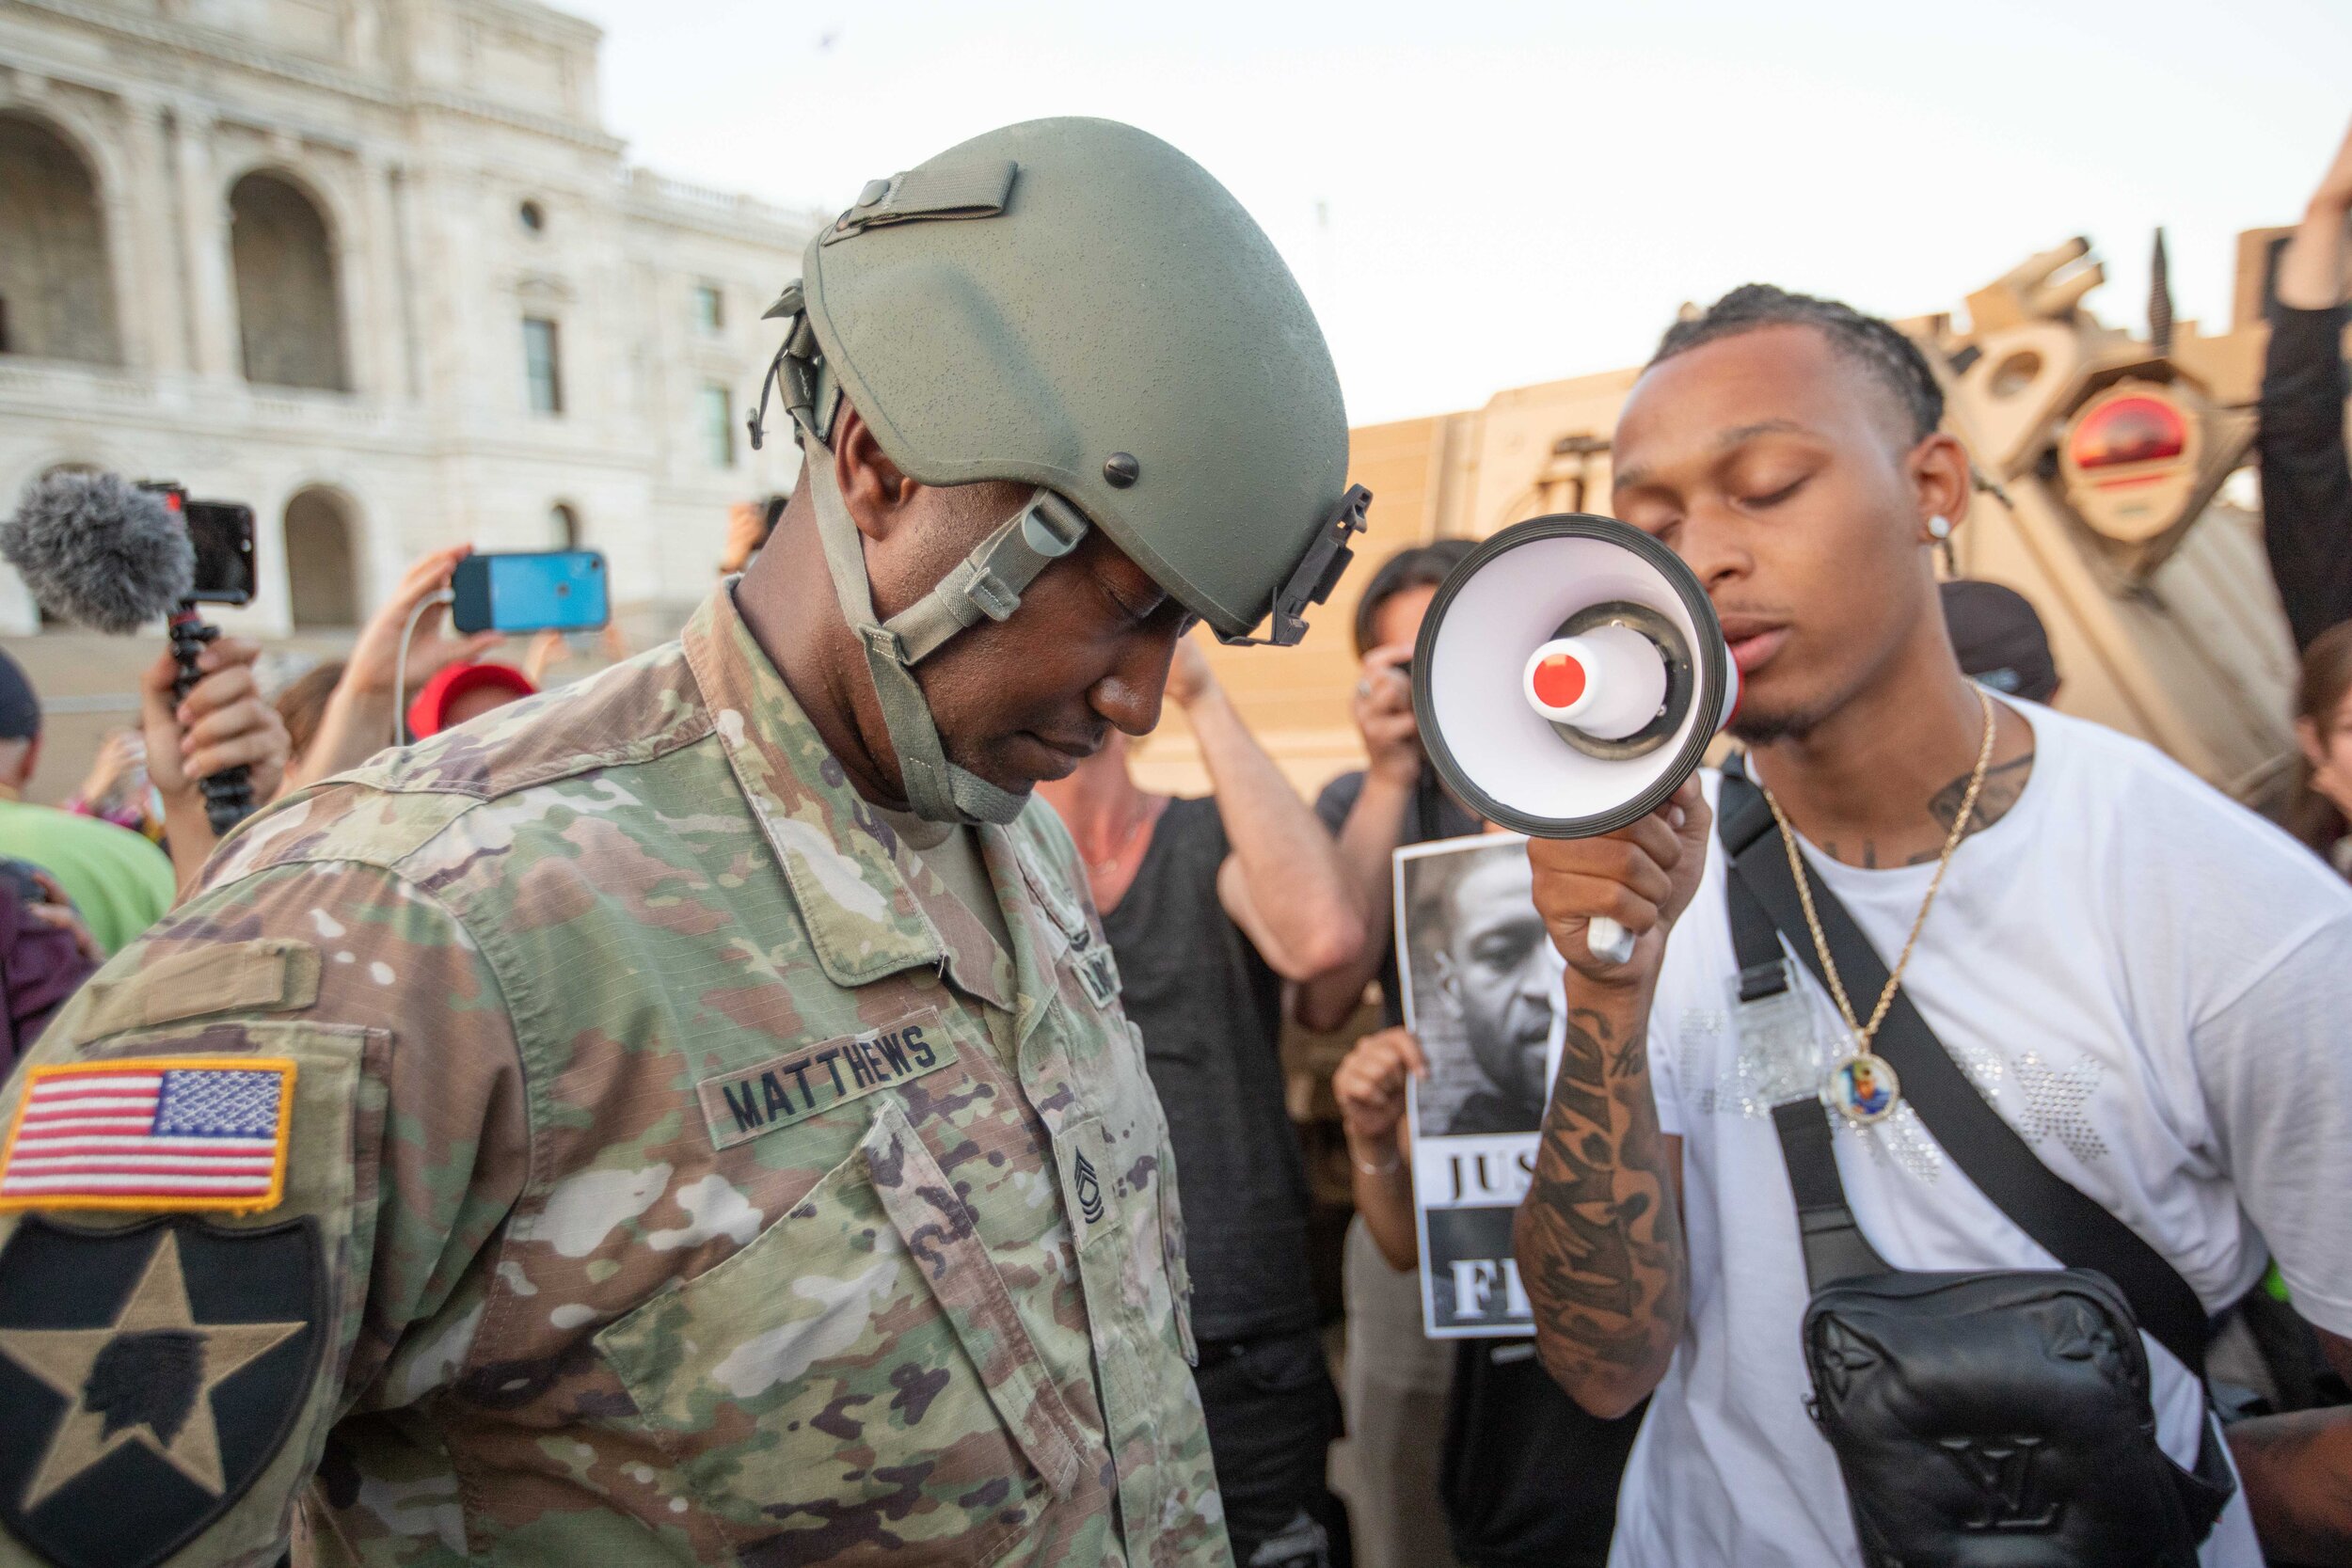  Master Sgt. Acie Matthews Jr., the Minnesota National Guard State Equal Opportunity Advisor bows his head as he prays with protesters on the steps of the Minnesota State Capitol in Saint Paul, Minnesota on June 1, 2020. Chris Juhn/Zenger 